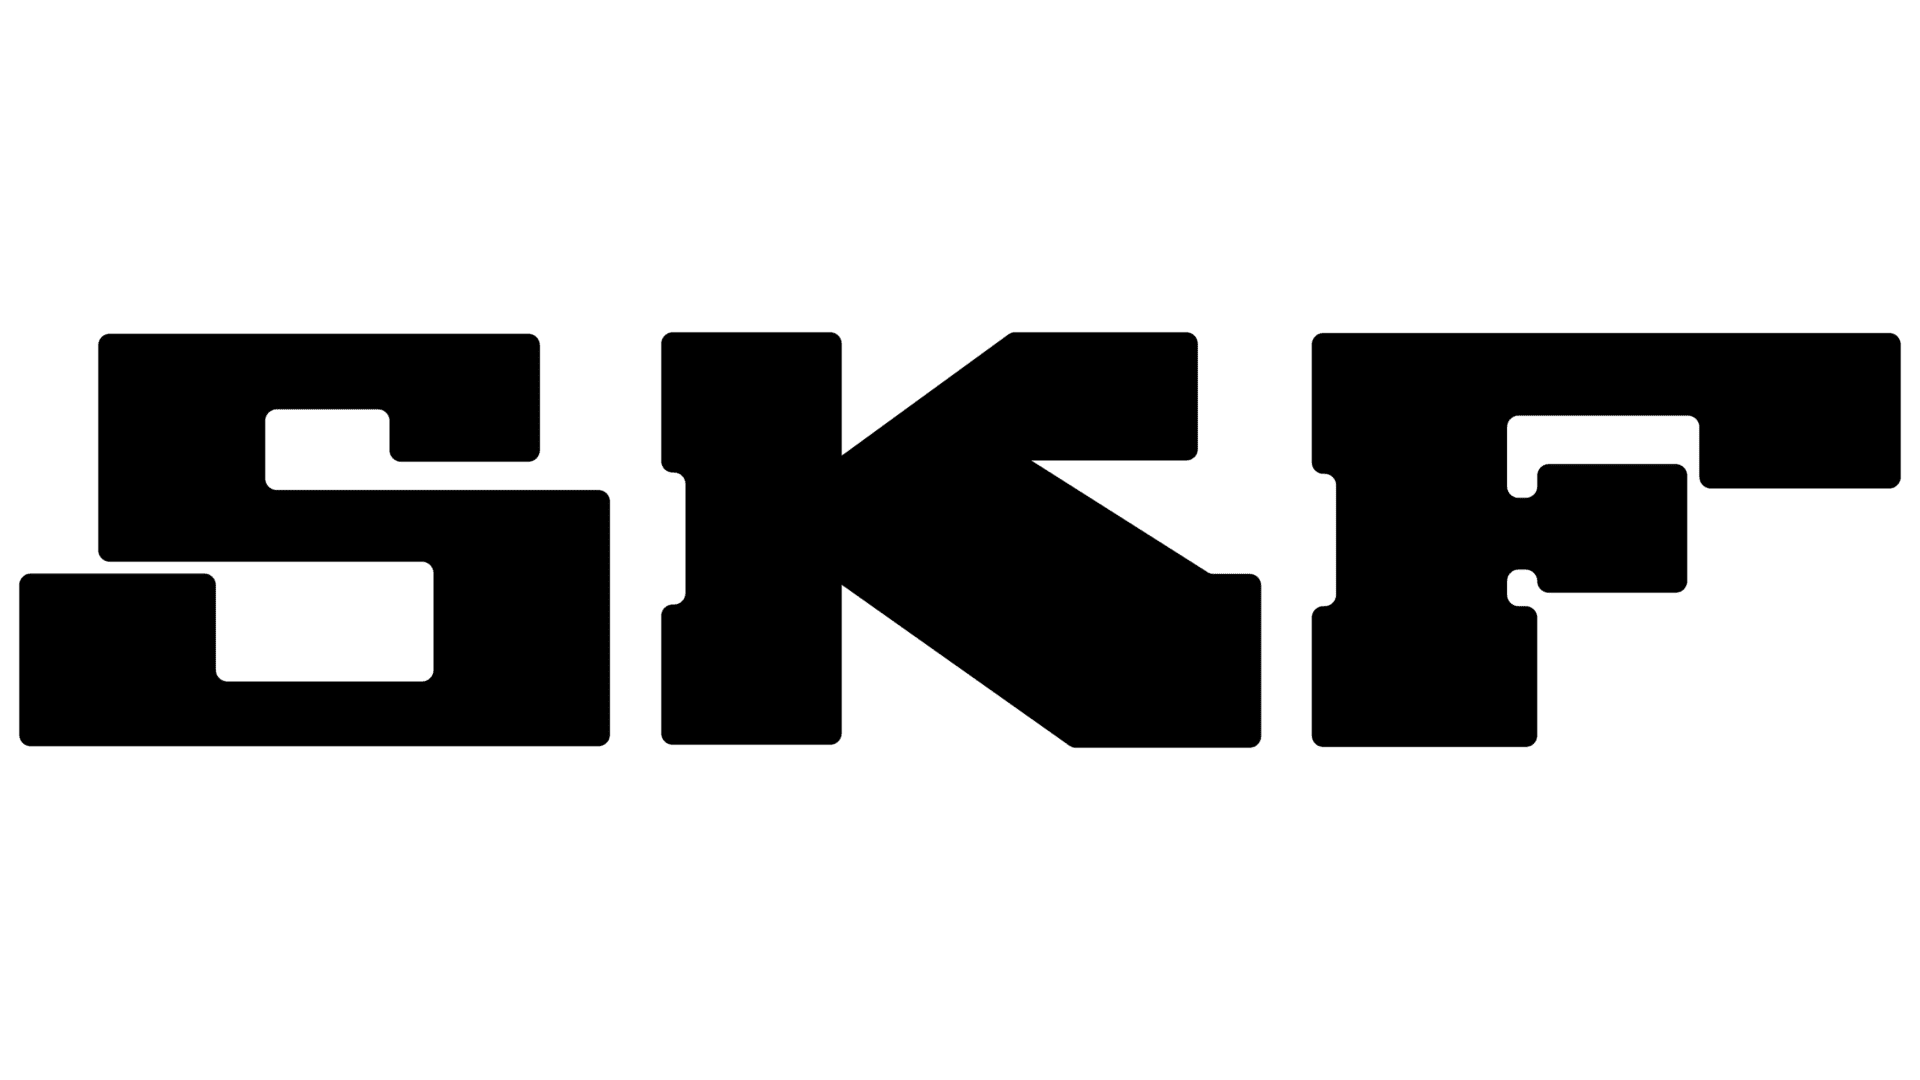 Skf logo on a green background.